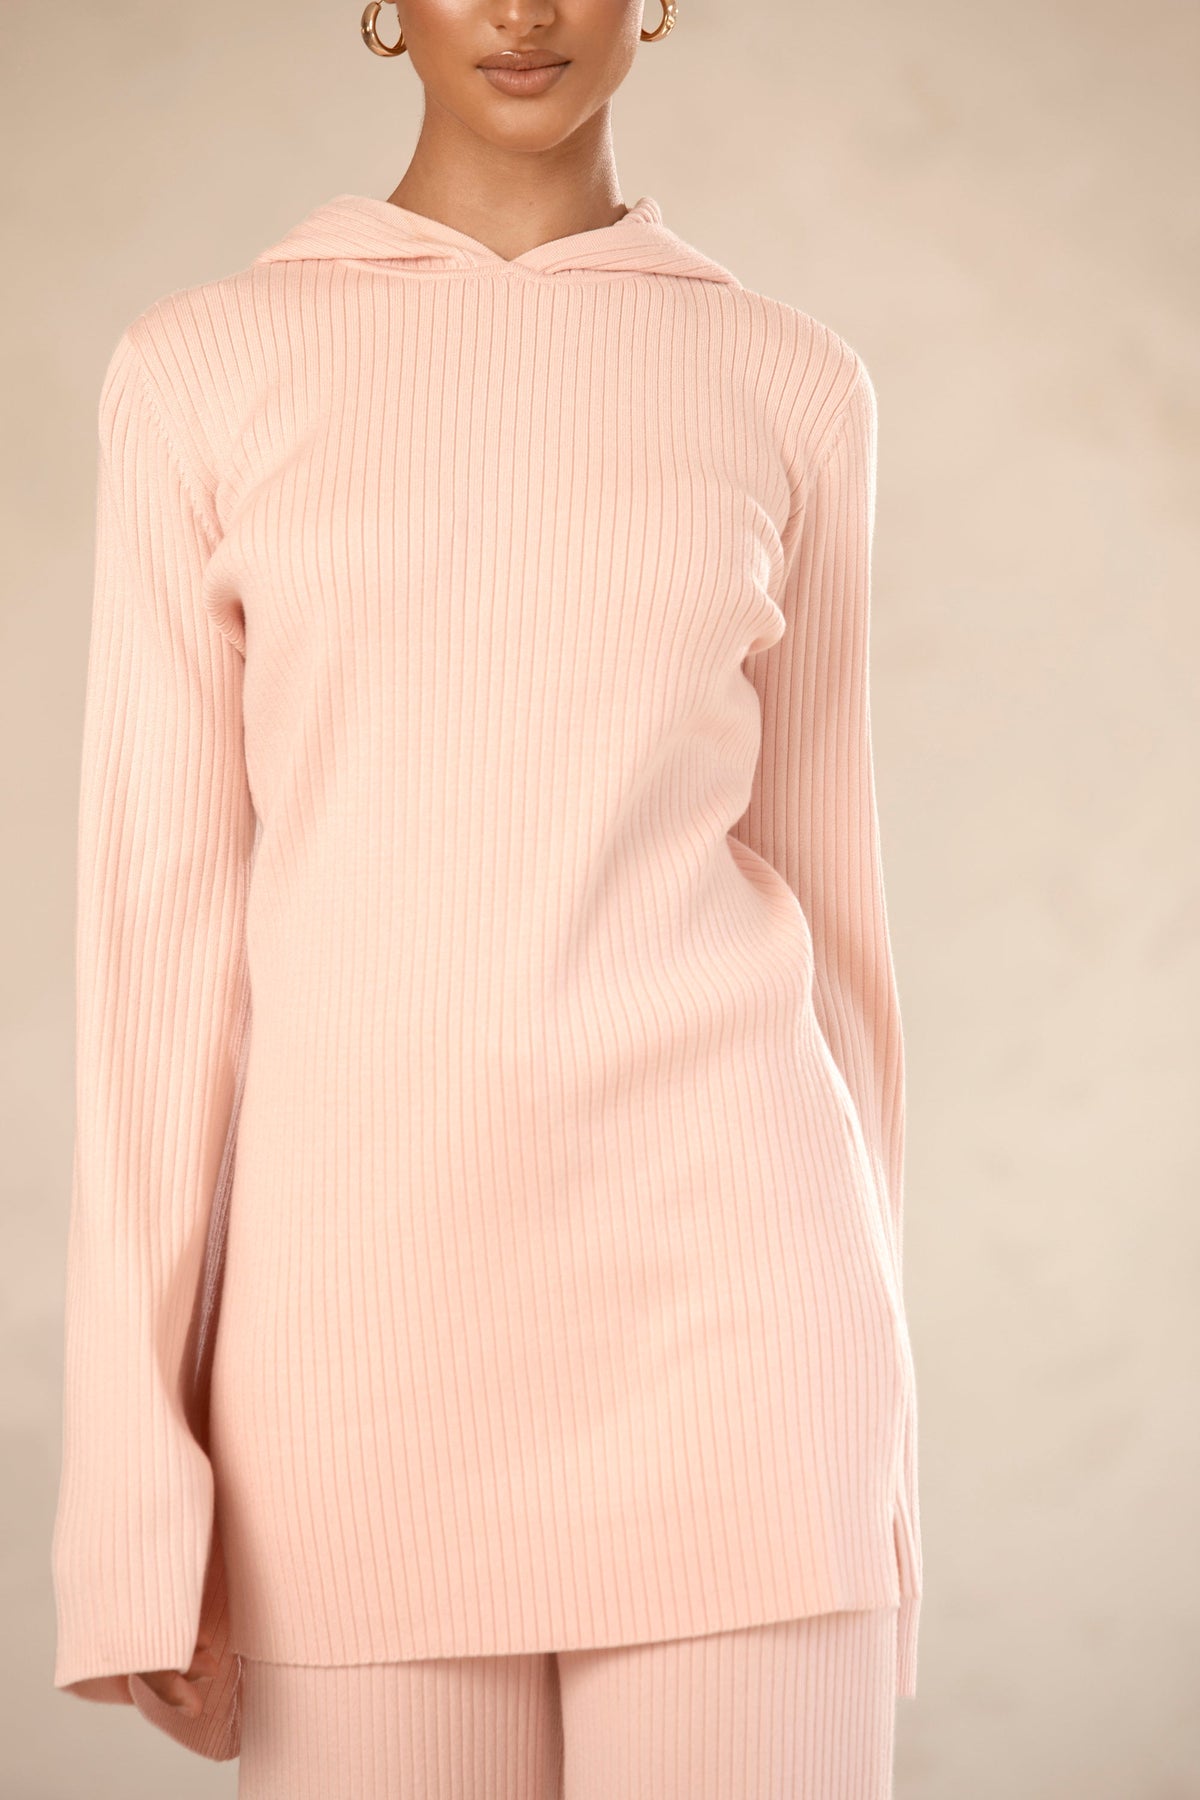 Hooded Knit Bell Sleeve Top - Pink Clay epschoolboard 